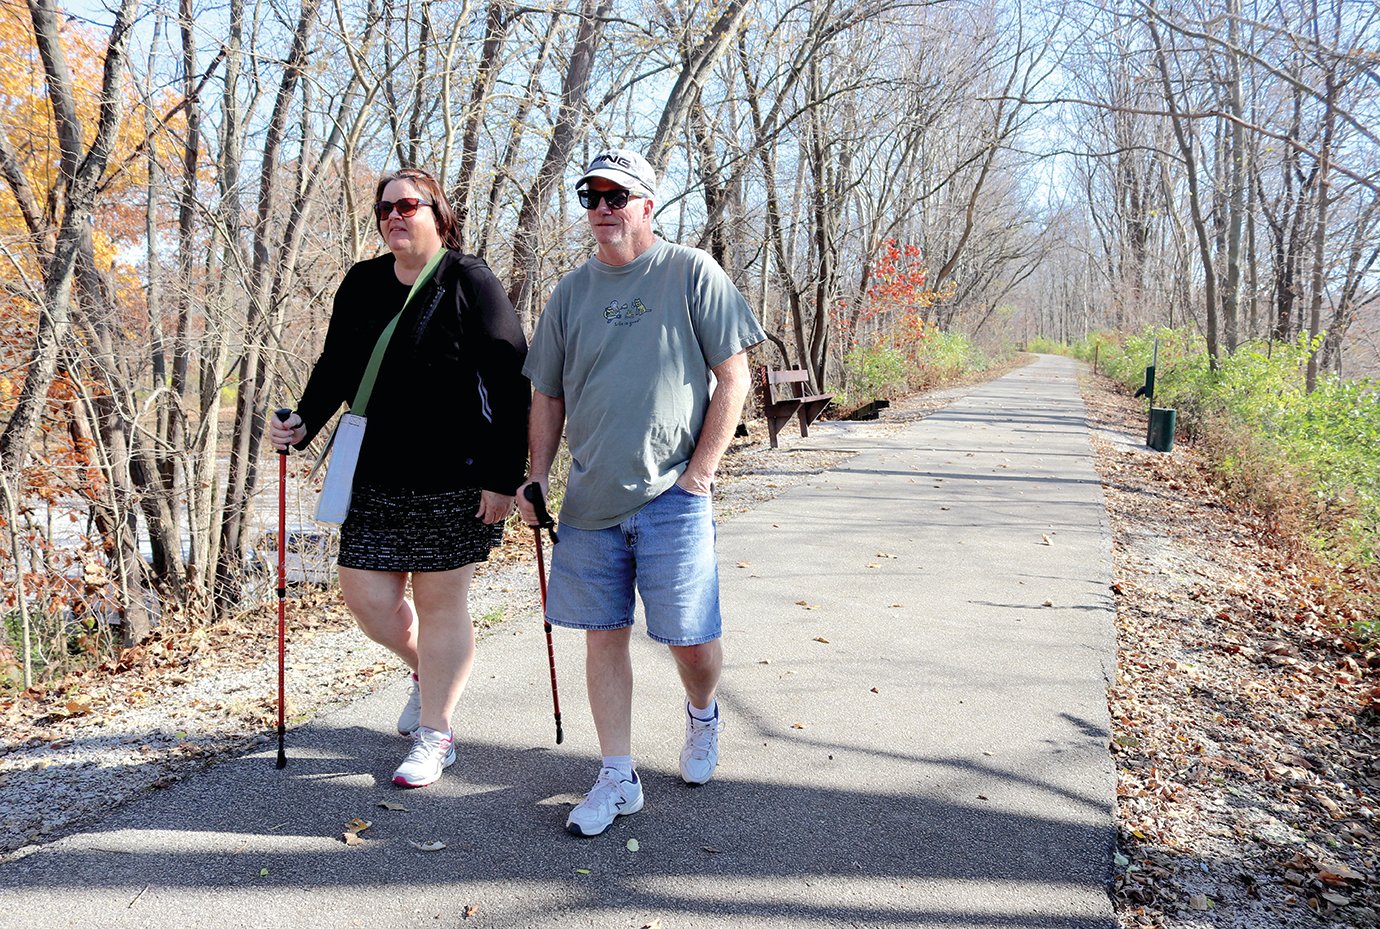 Shannon and Mitch Harmon take advantage of Friday's fair weather by visiting Rock River Ridge Trailhead for some socially distanced exercise.